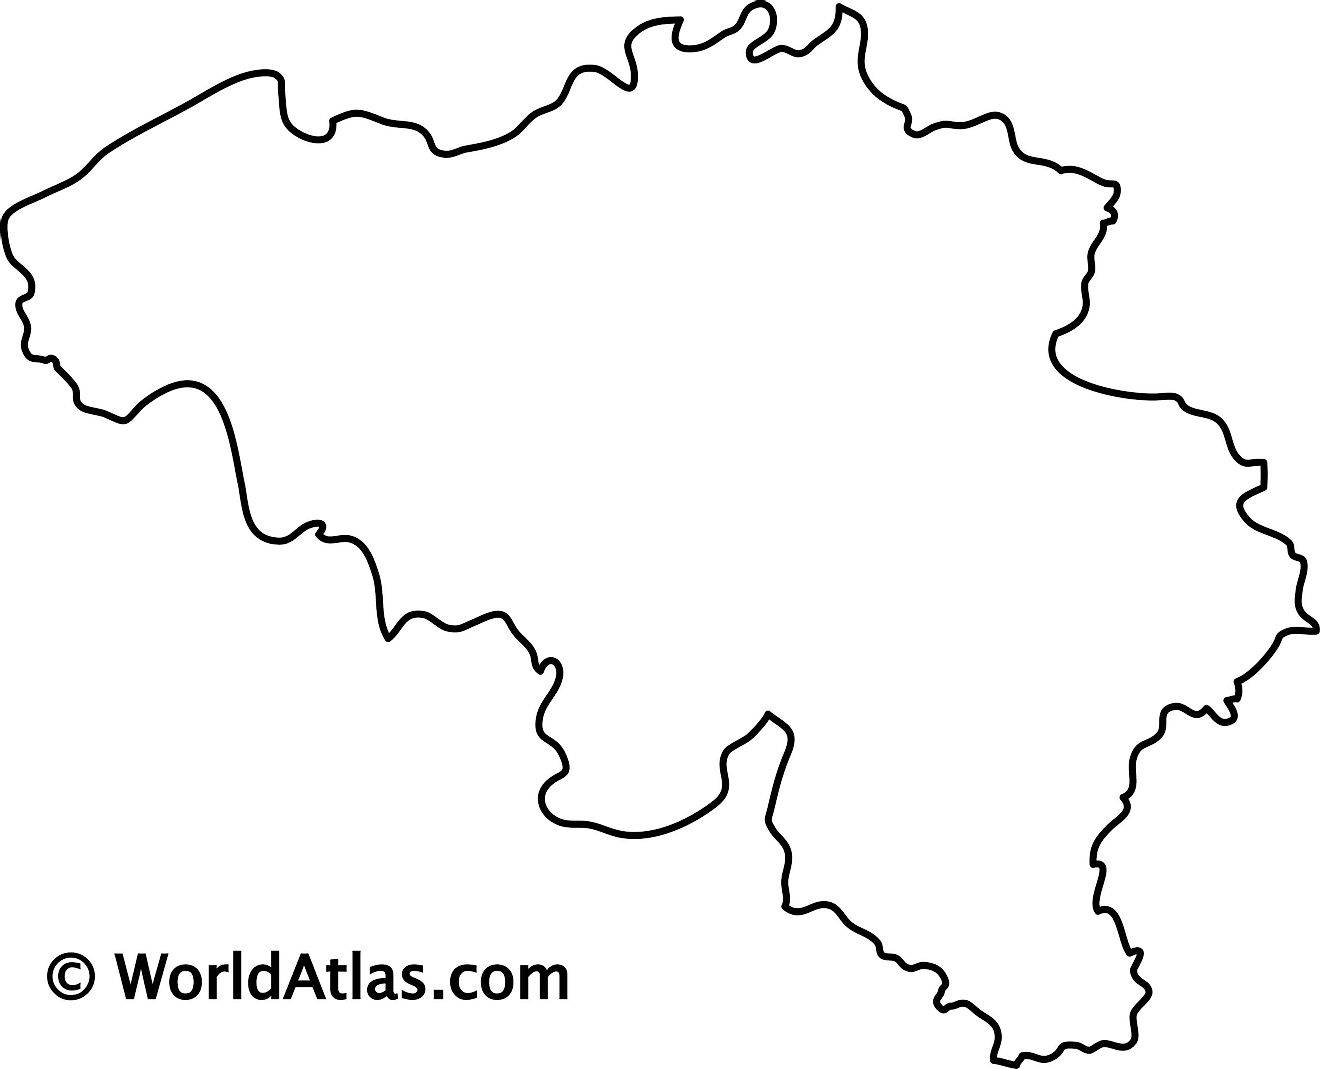 Blank outline map of Belgium